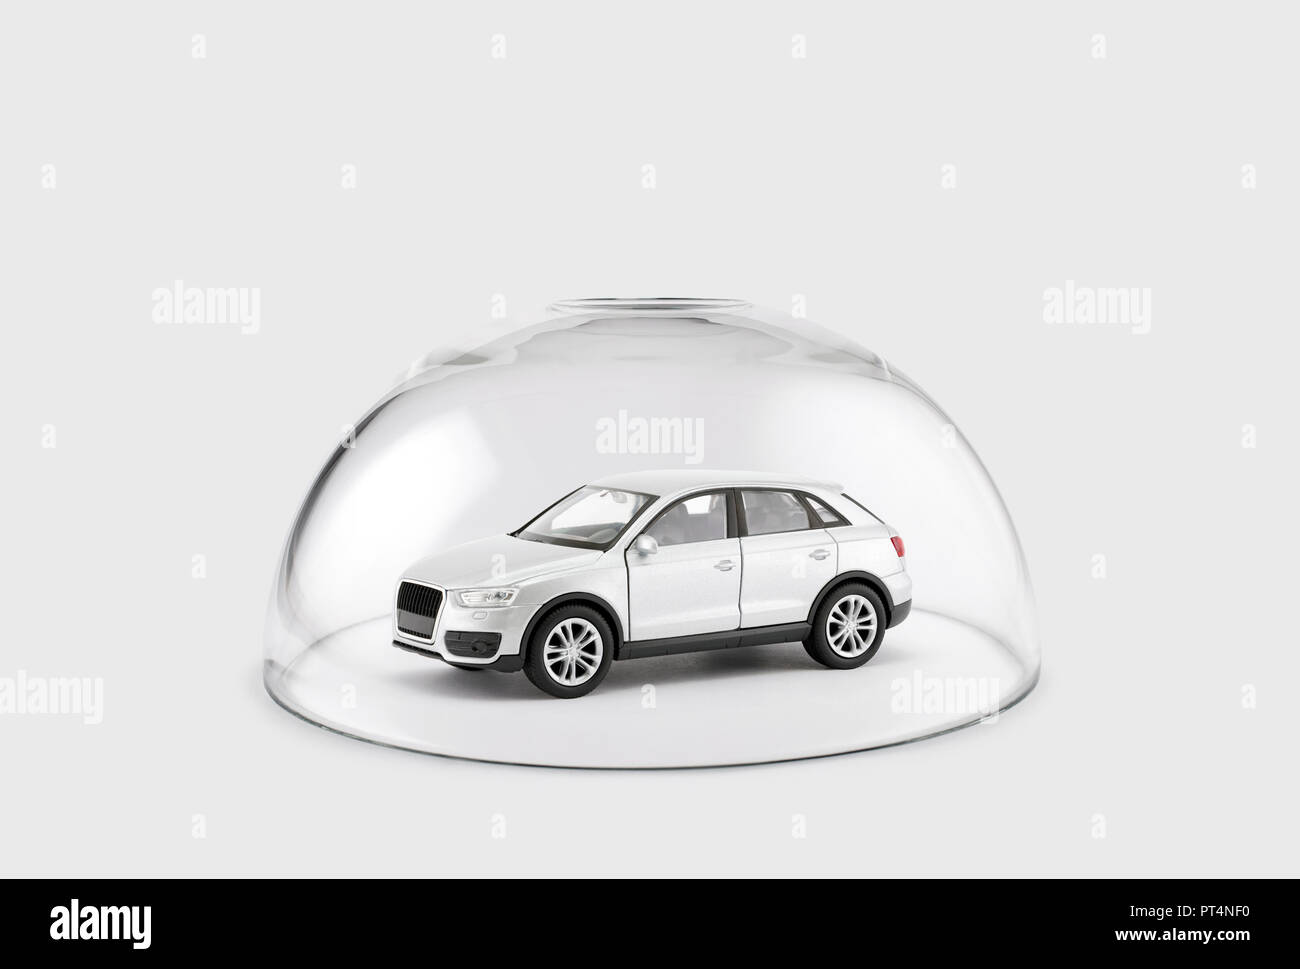 Modern silver car protected under a glass dome Stock Photo